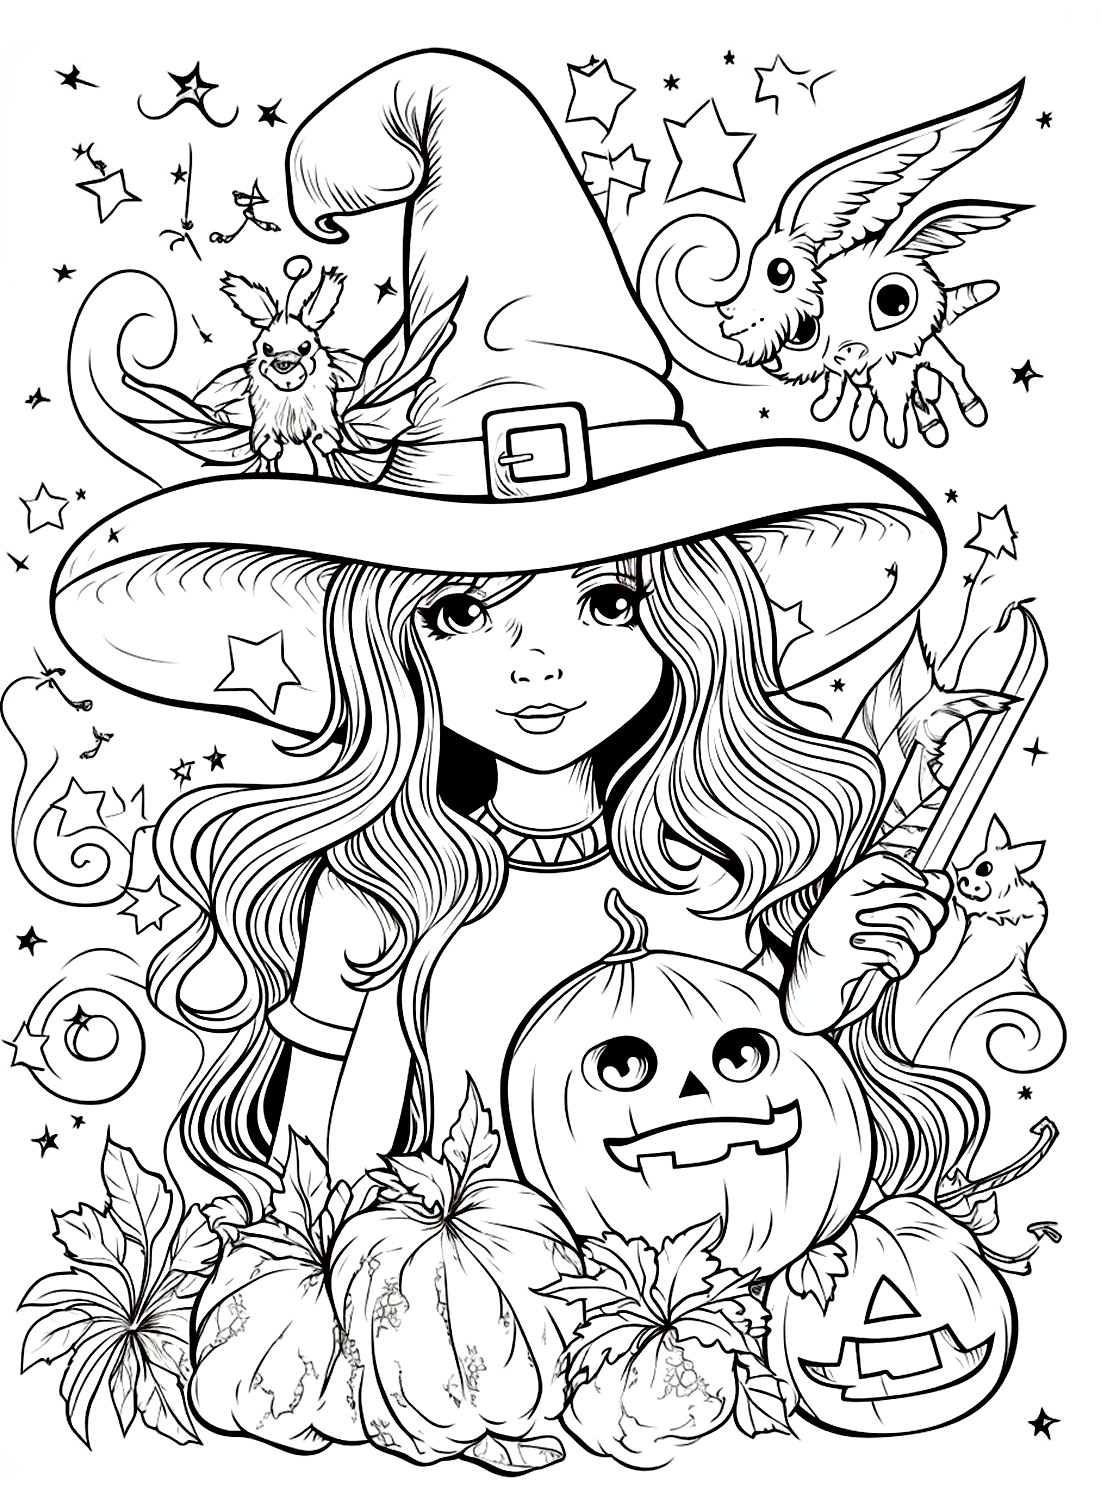 Printable Halloween Witch page from Halloween Witch